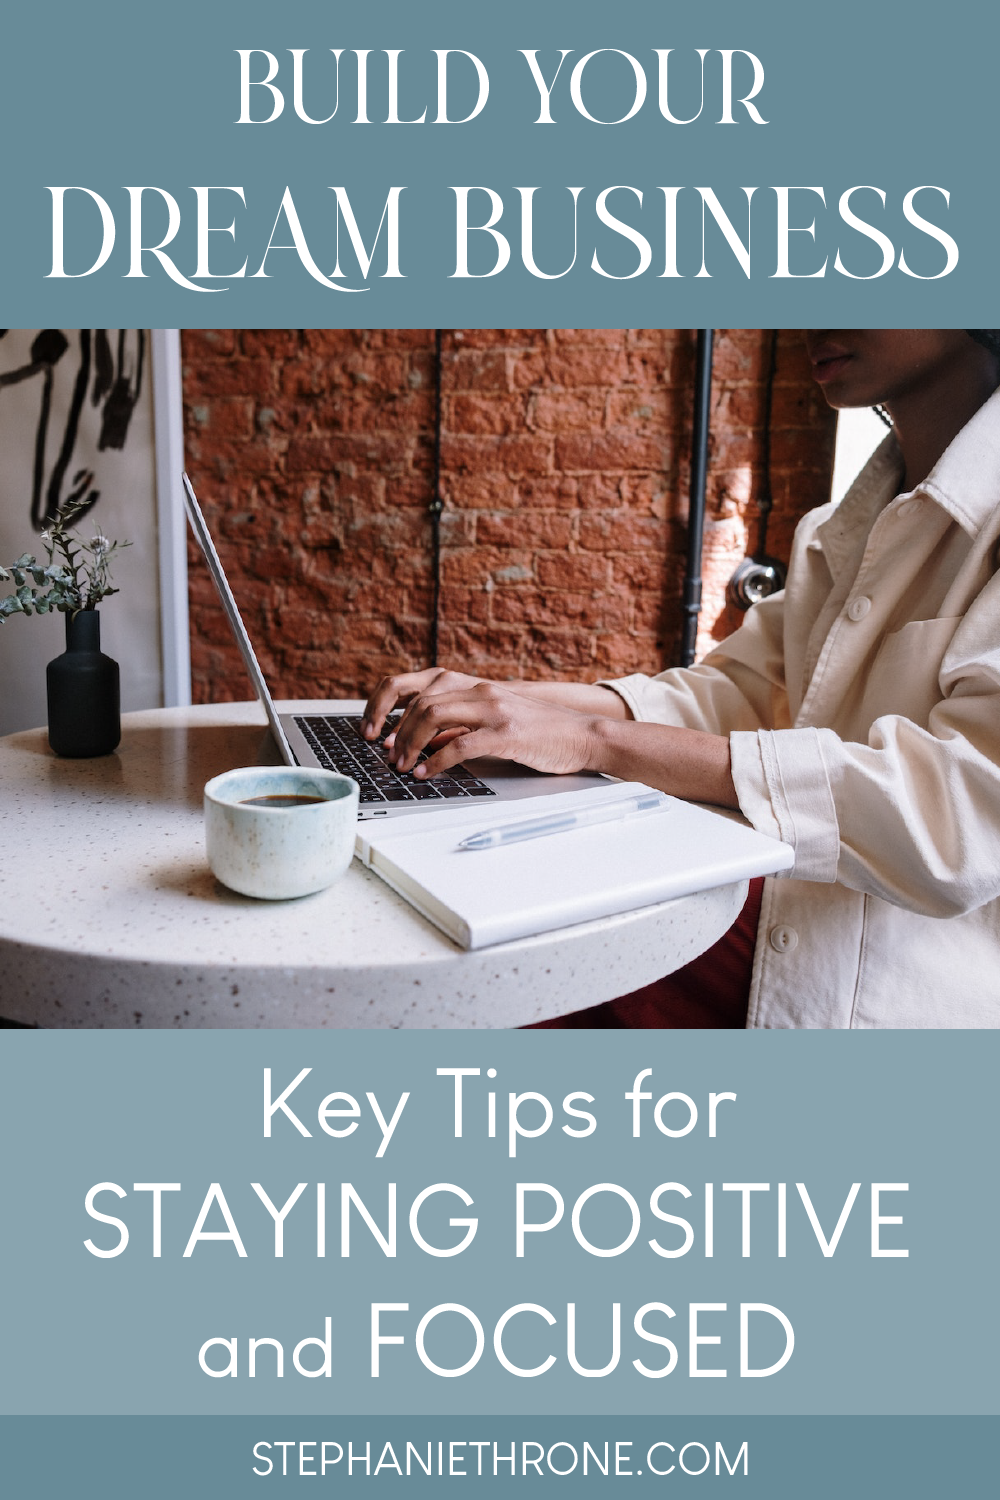 Build Your Dream Business Key Tips to Stay Positive and Focused